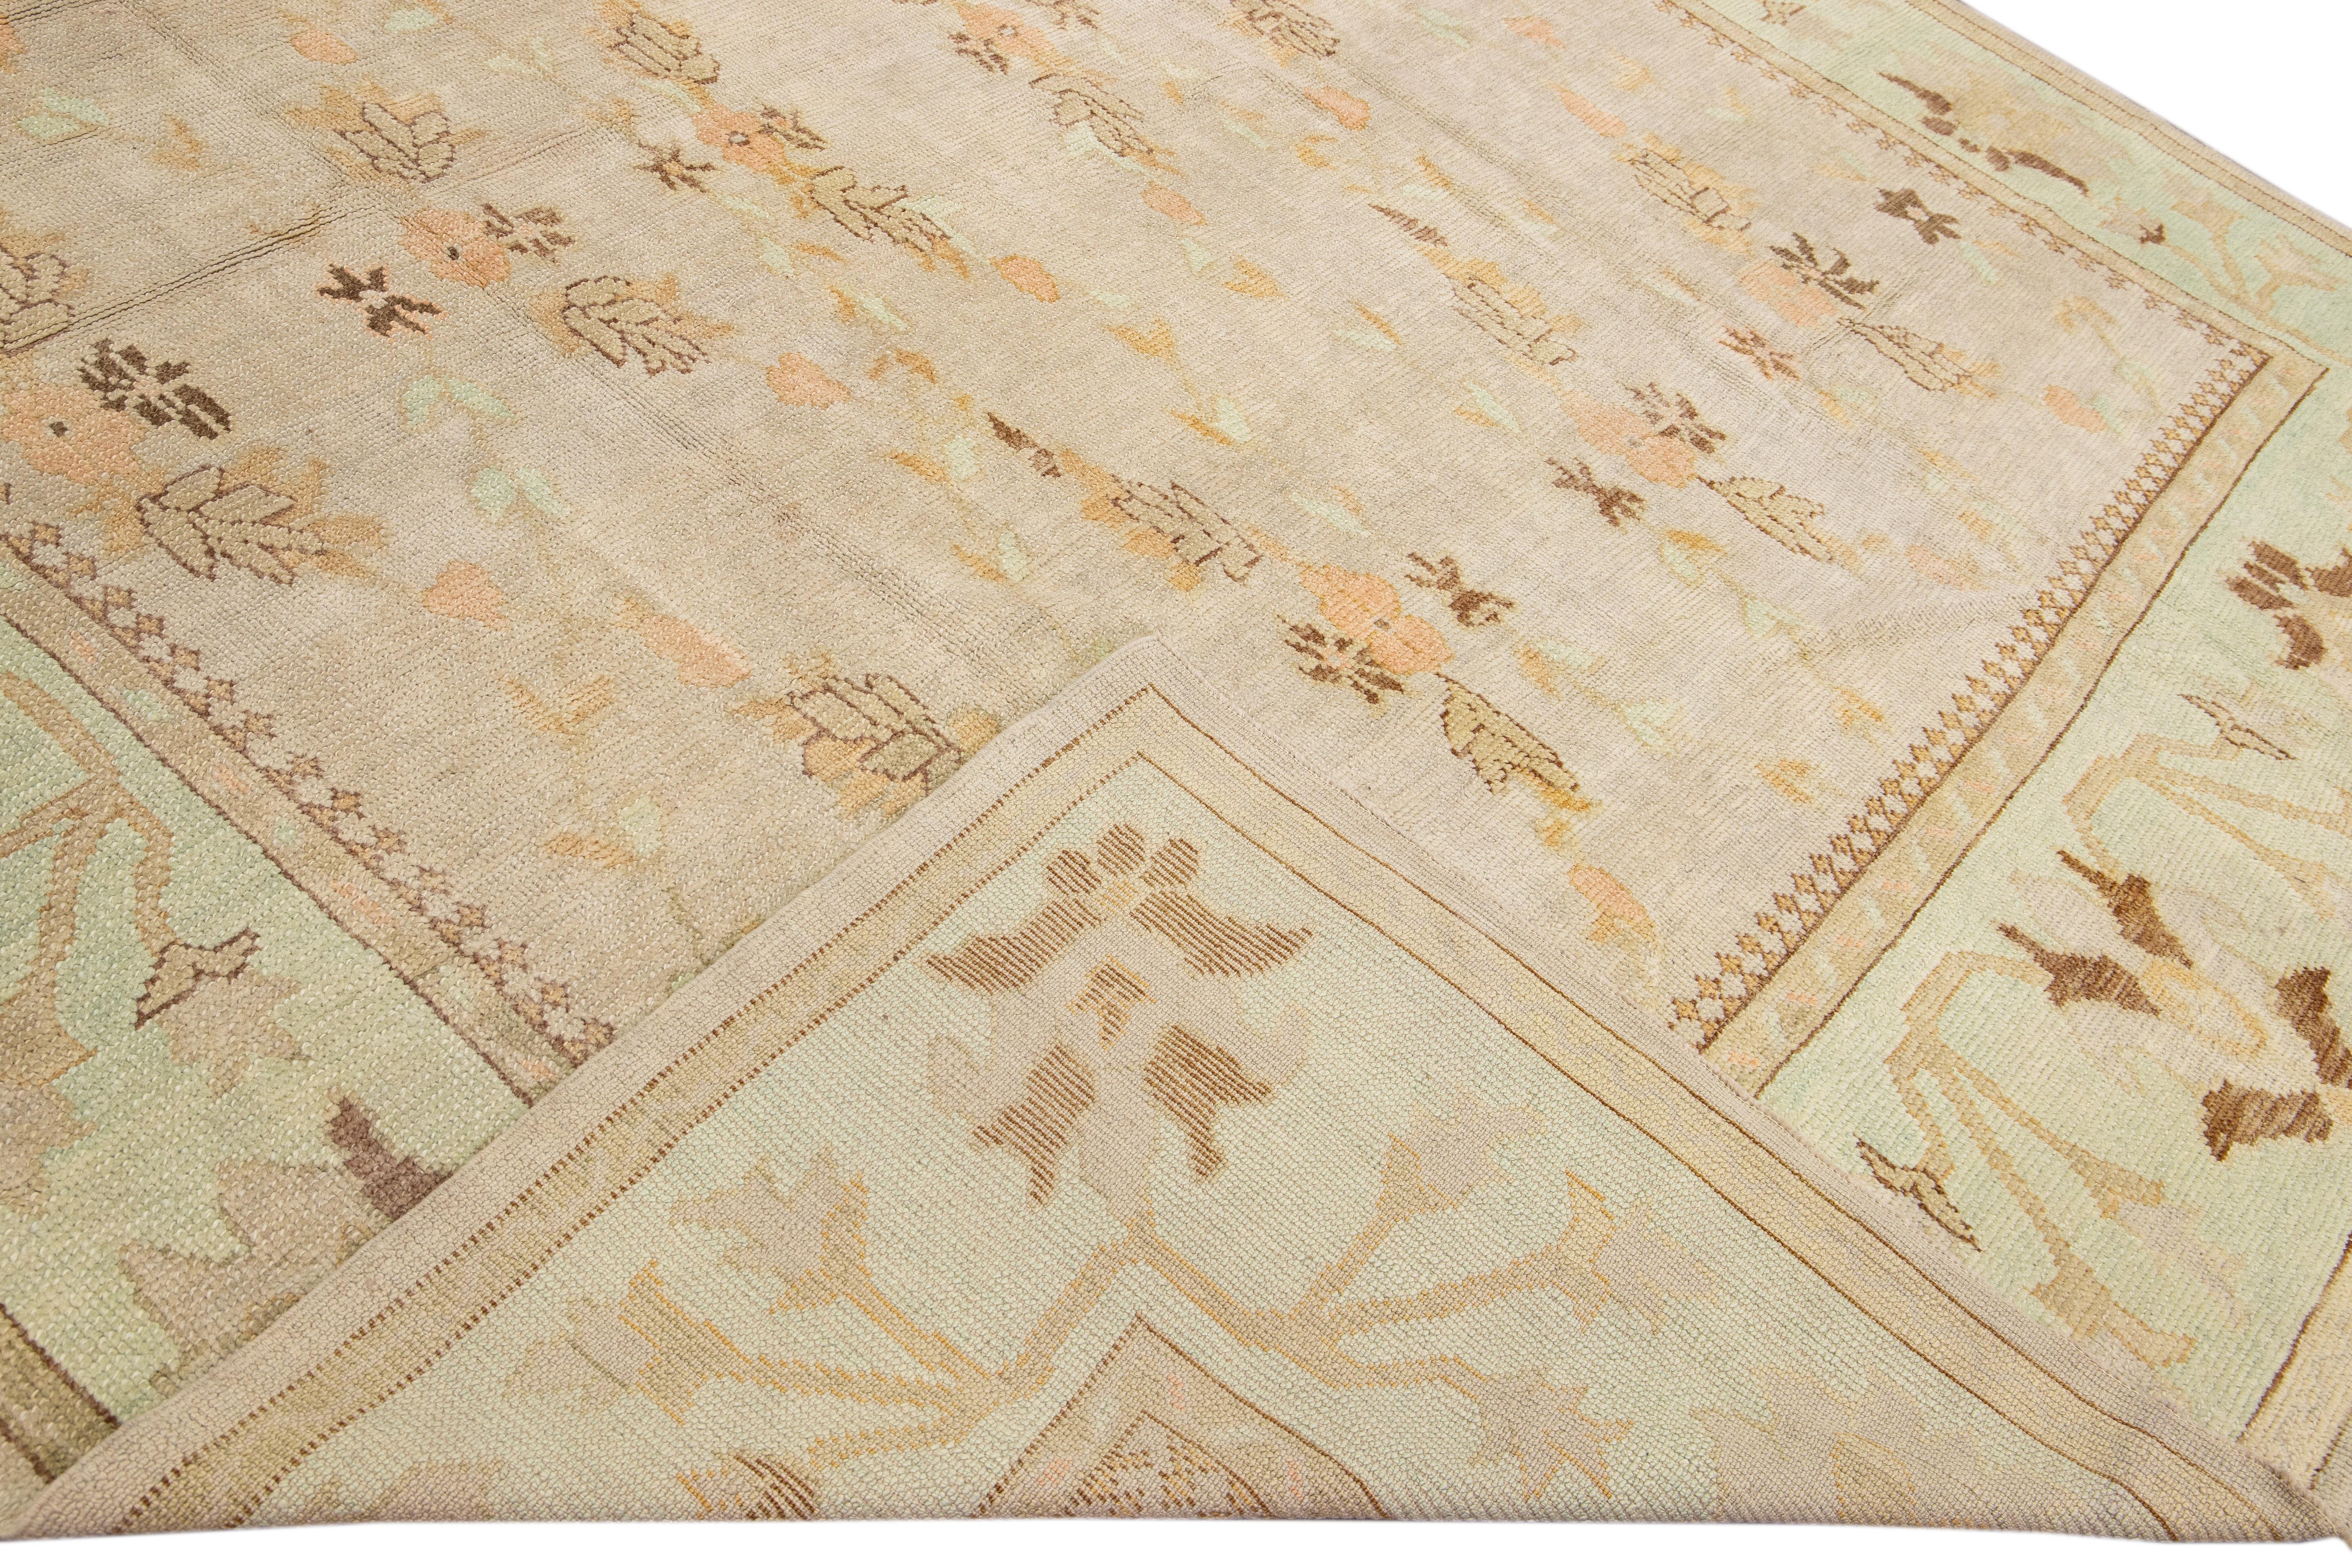 Beautiful modern oushak hand-knotted wool rug with a beige field. This Turkish piece has a green-designed frame and peach and brown accents in a gorgeous all-over geometric floral Motif.

This rug measures: 10' x 14'9